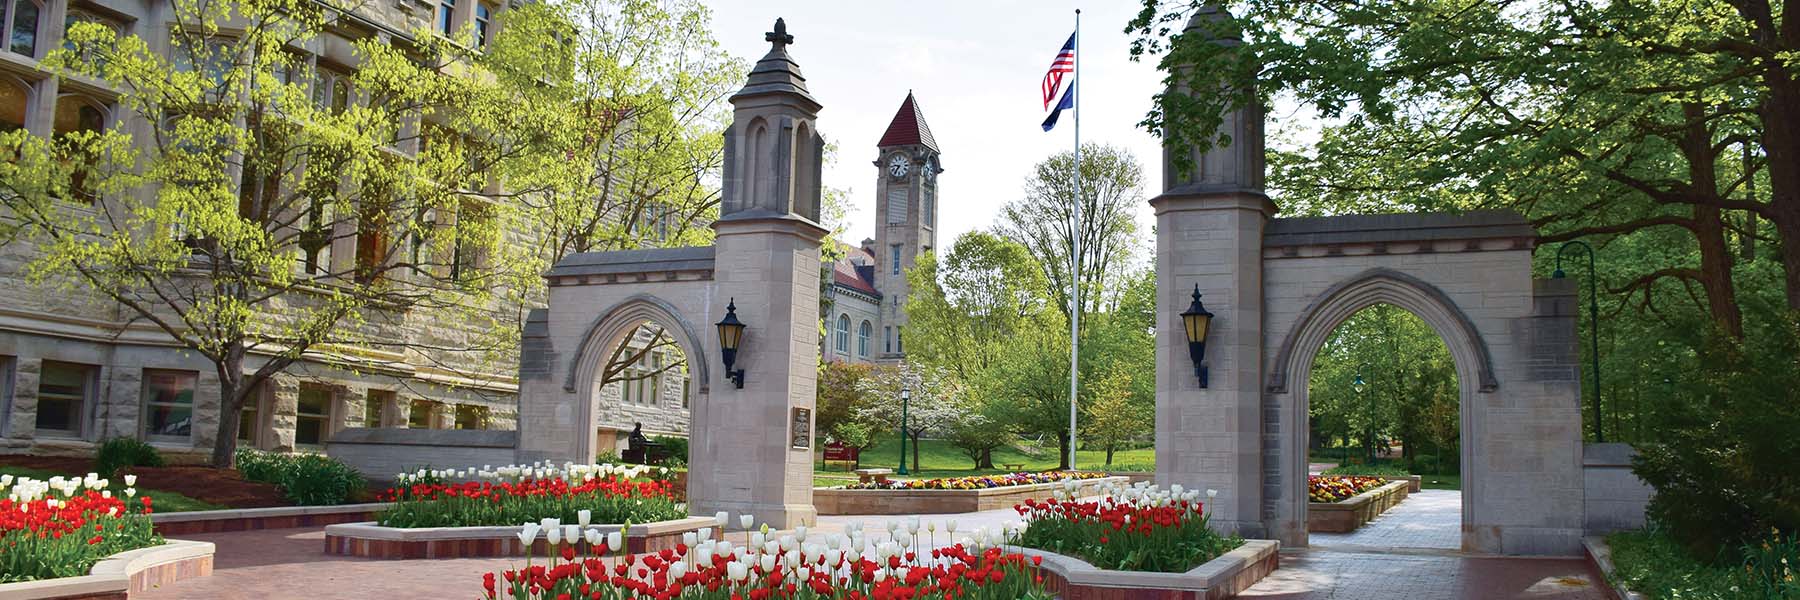 Sample Gates--west side entrance to the Indiana University Bloomington campus.